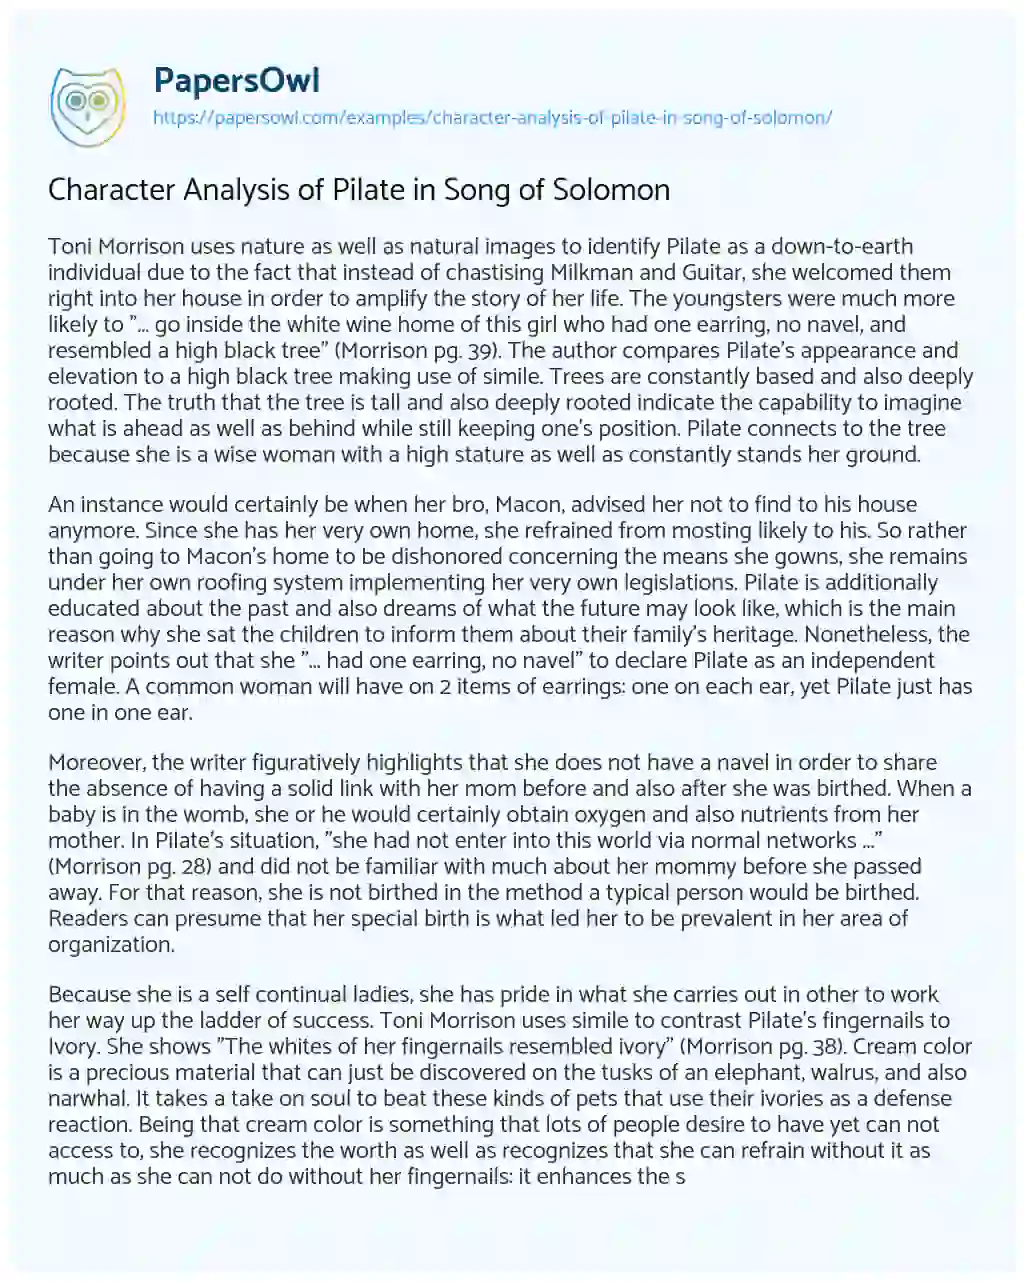 Essay on Character Analysis of Pilate in Song of Solomon